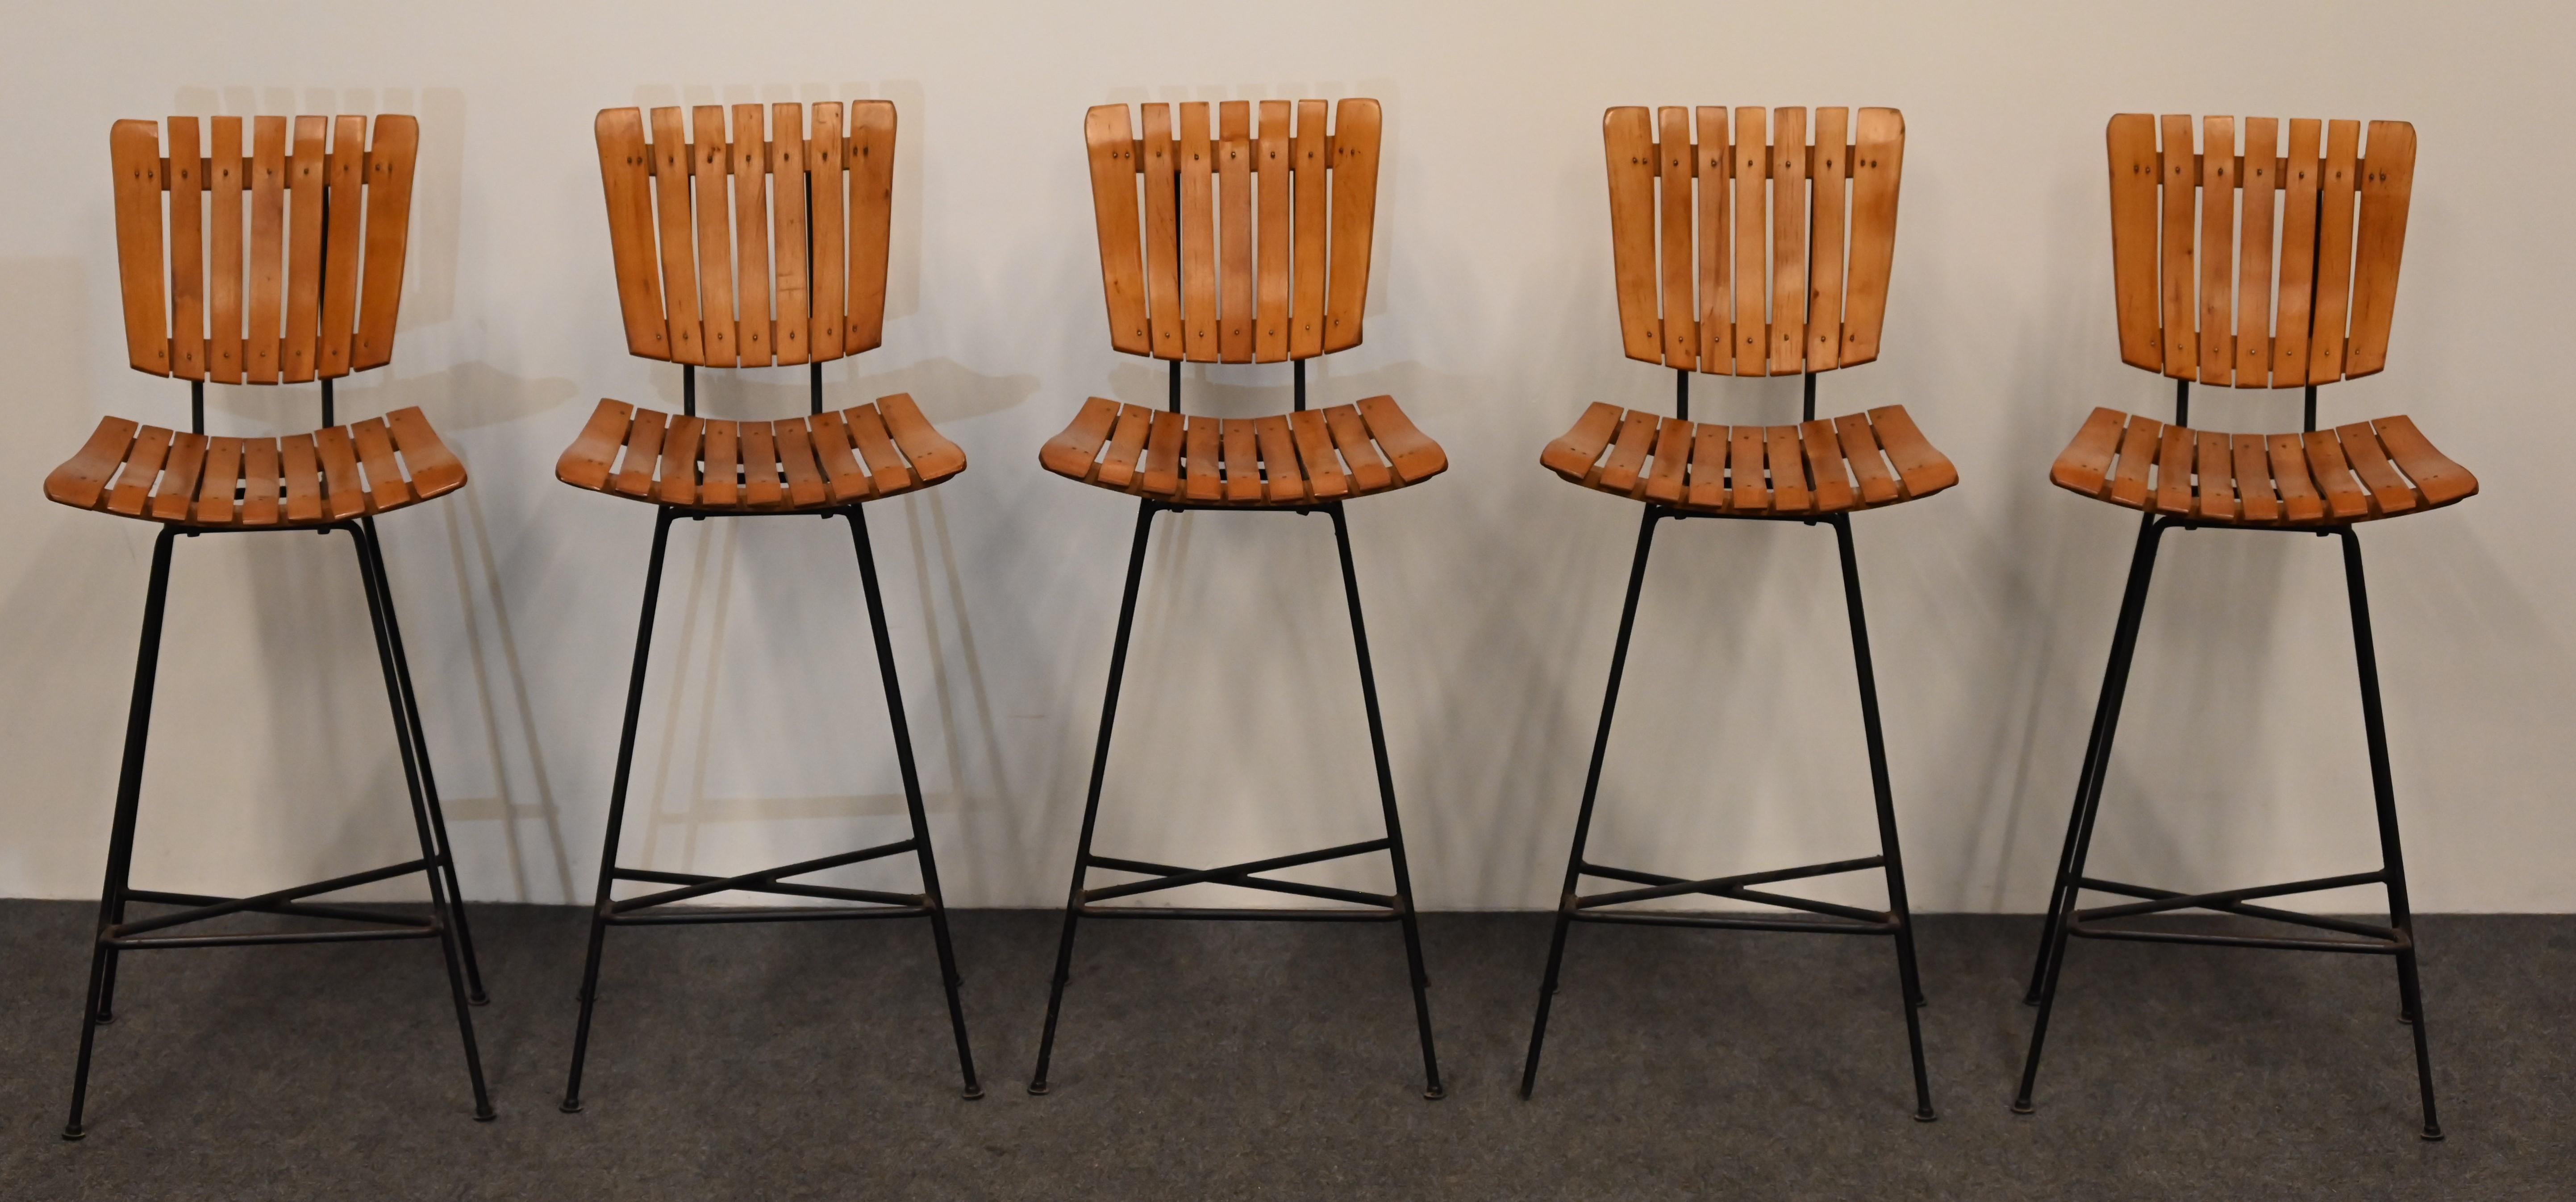 A mid-century set of five slatted maple wood and iron bar stools designed by Arthur Umanoff. This set of counter stools would look great in any modern, contemporary or traditional setting. The designer stools are in very good condition with